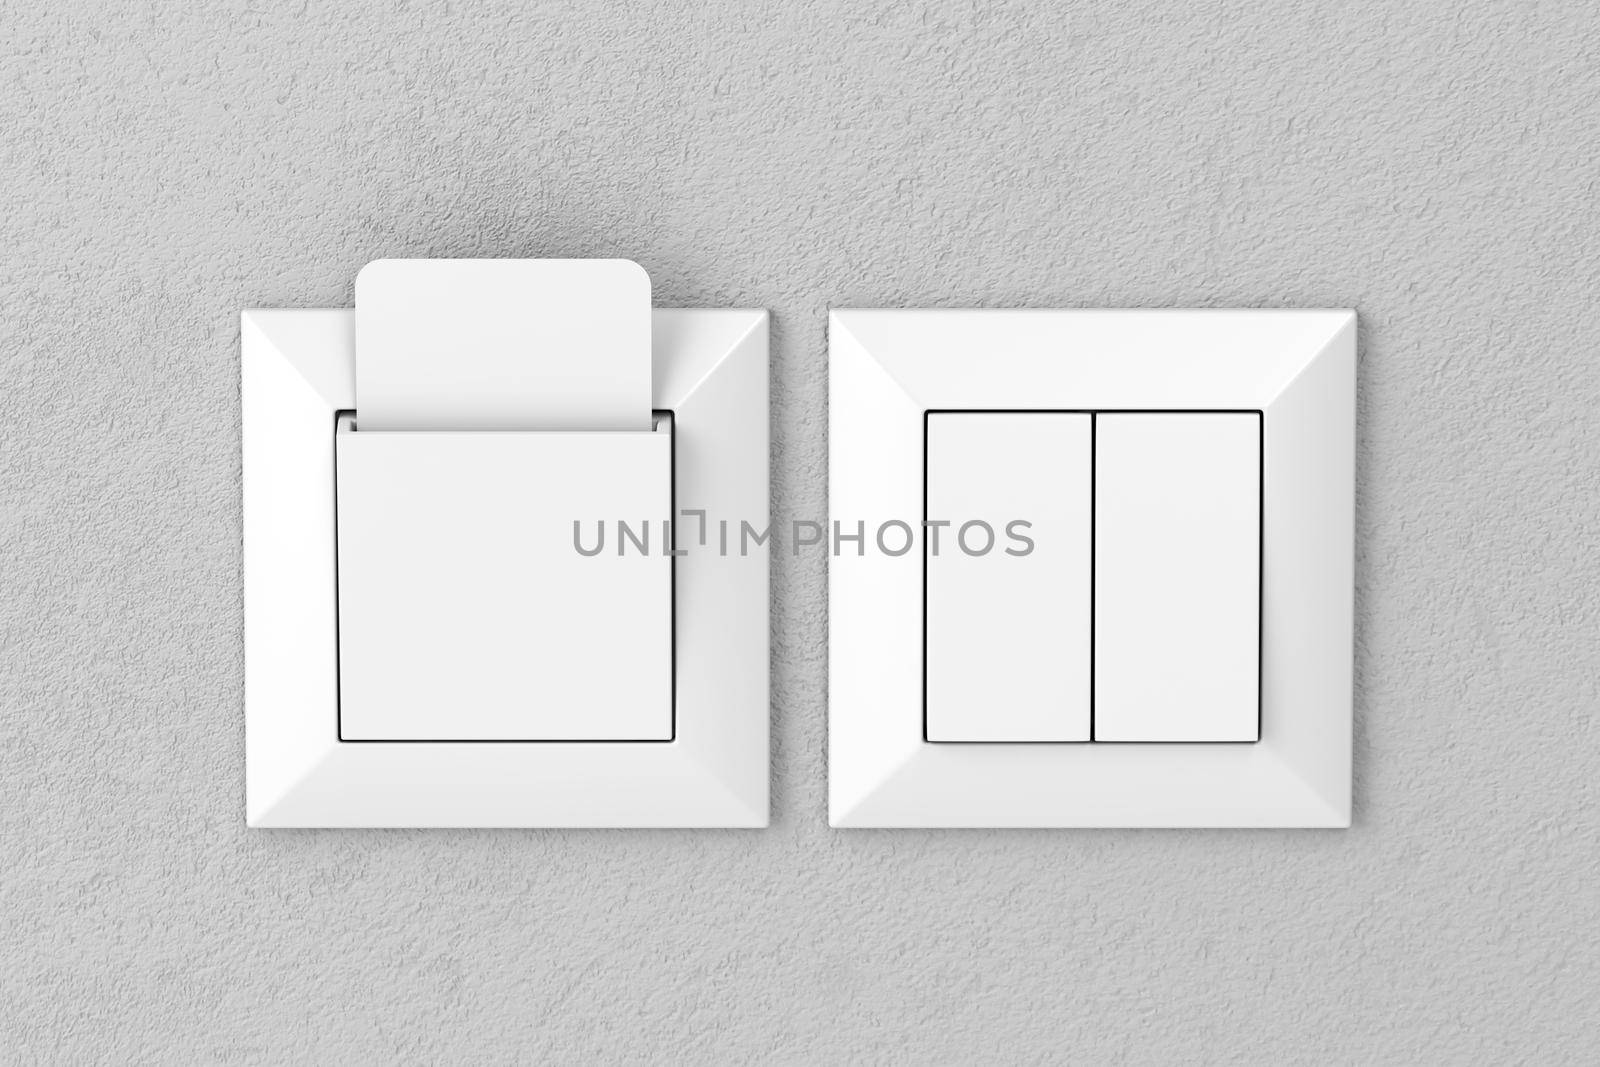 Key card reader and light switches by magraphics